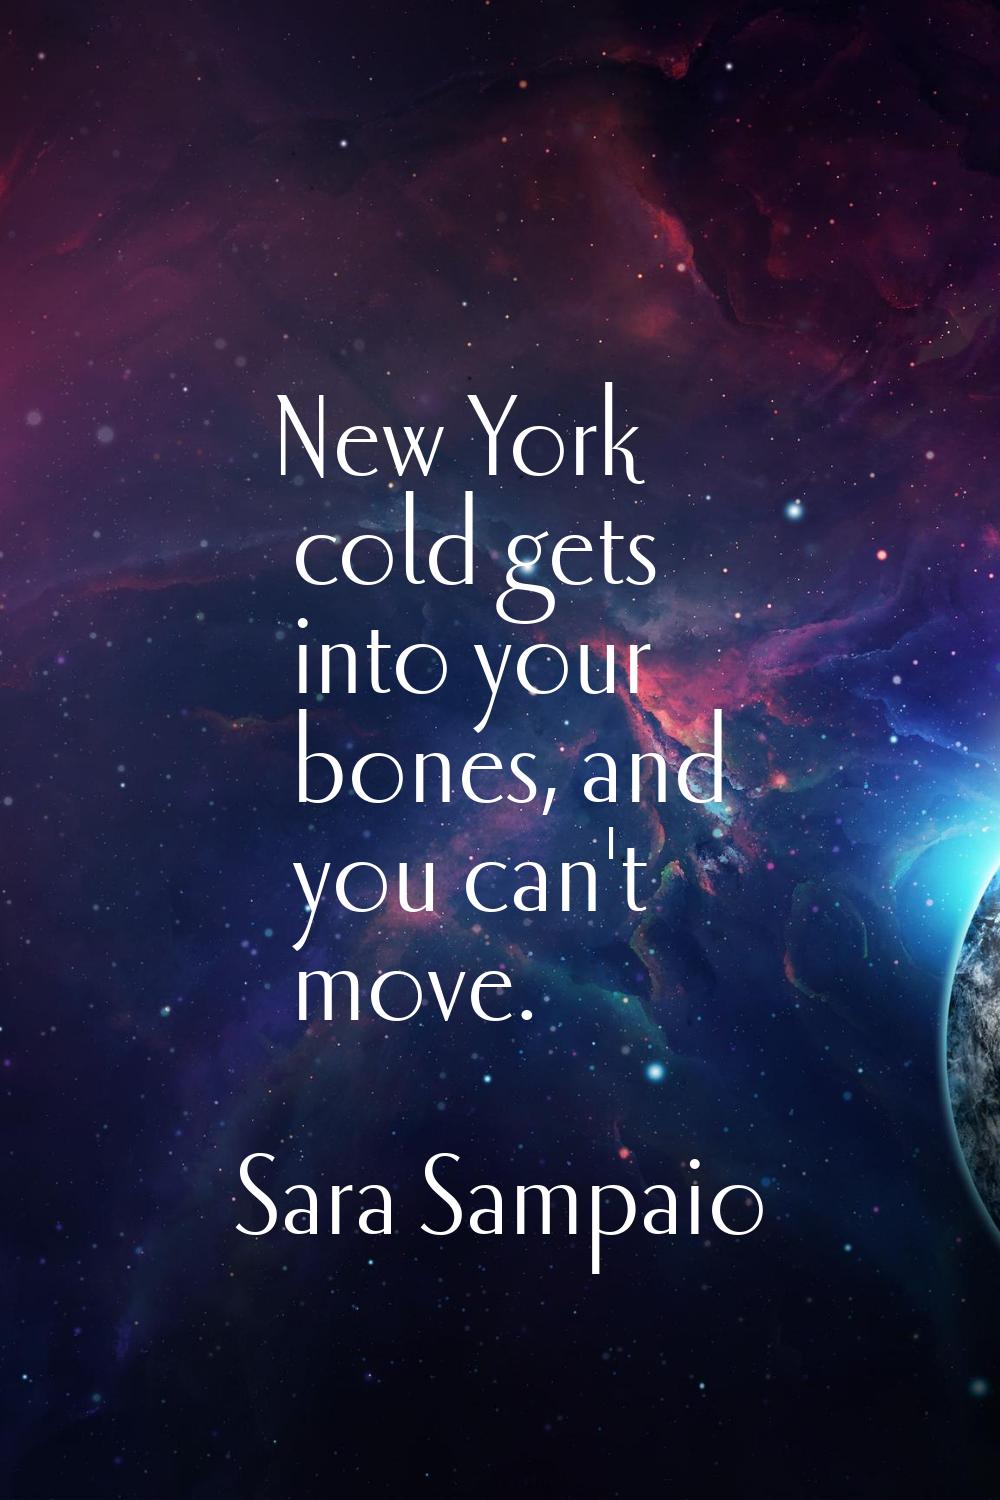 New York cold gets into your bones, and you can't move.